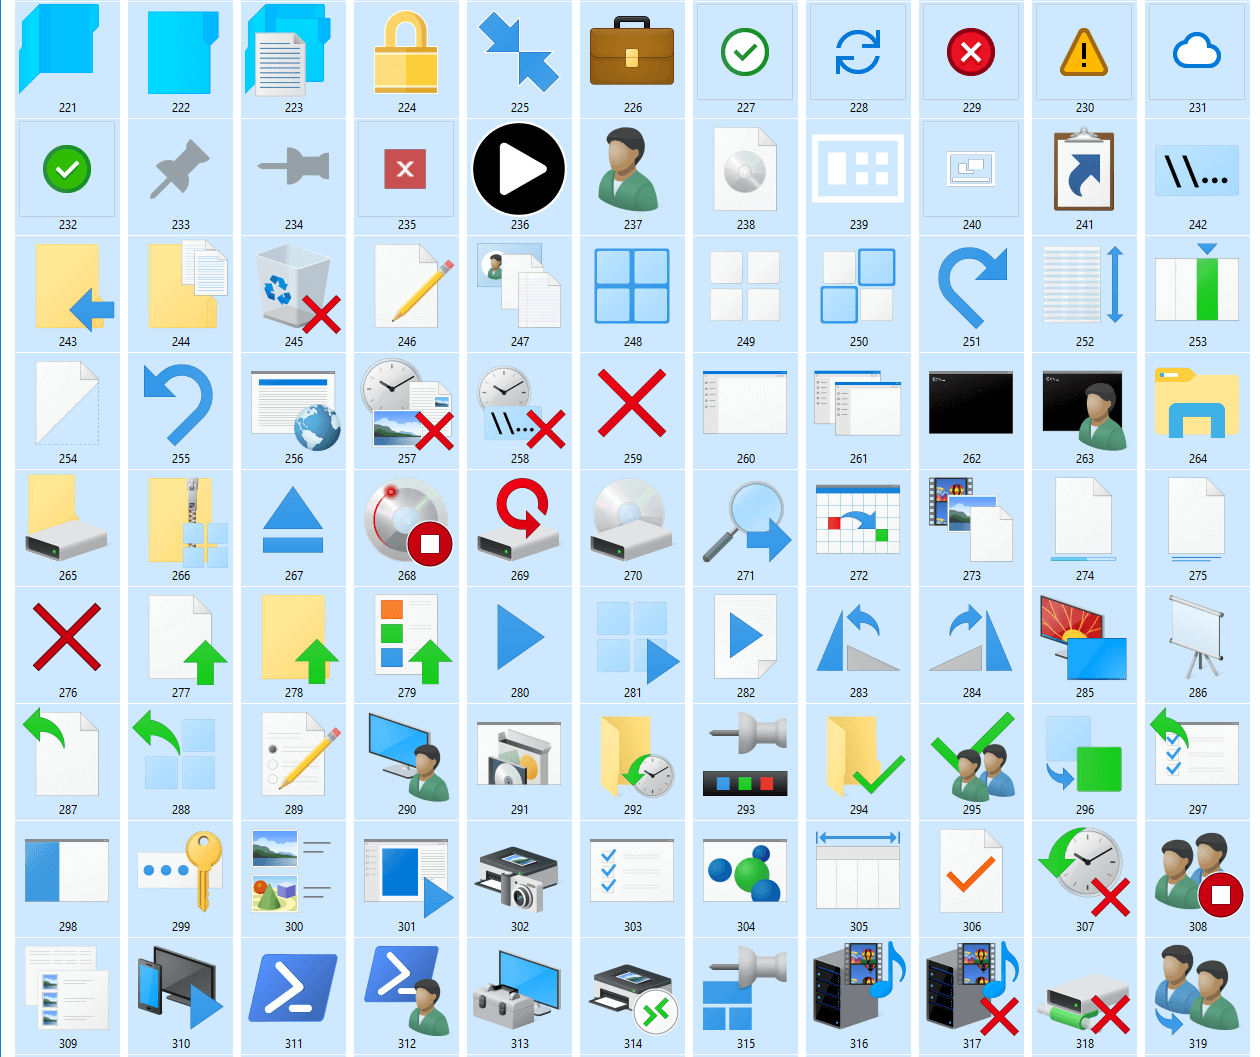 Windows 10 icons of imageres.dll (3/4)